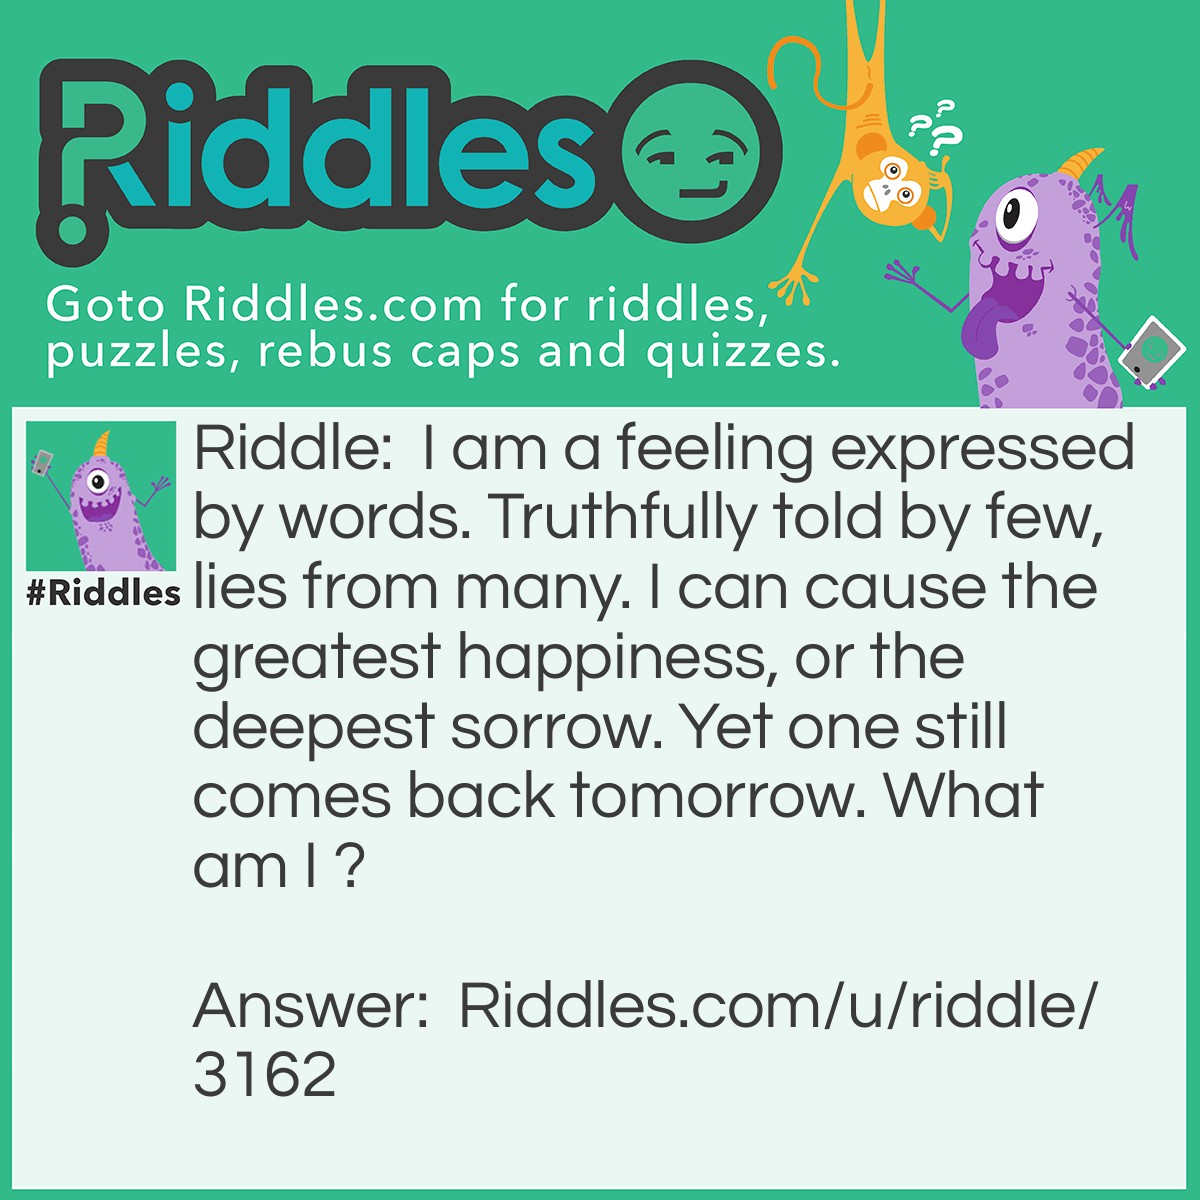 Riddle: I am a feeling expressed by words. Truthfully told by few, lies from many. I can cause the greatest happiness, or the deepest sorrow. Yet one still comes back tomorrow. What am I ? Answer: Love.